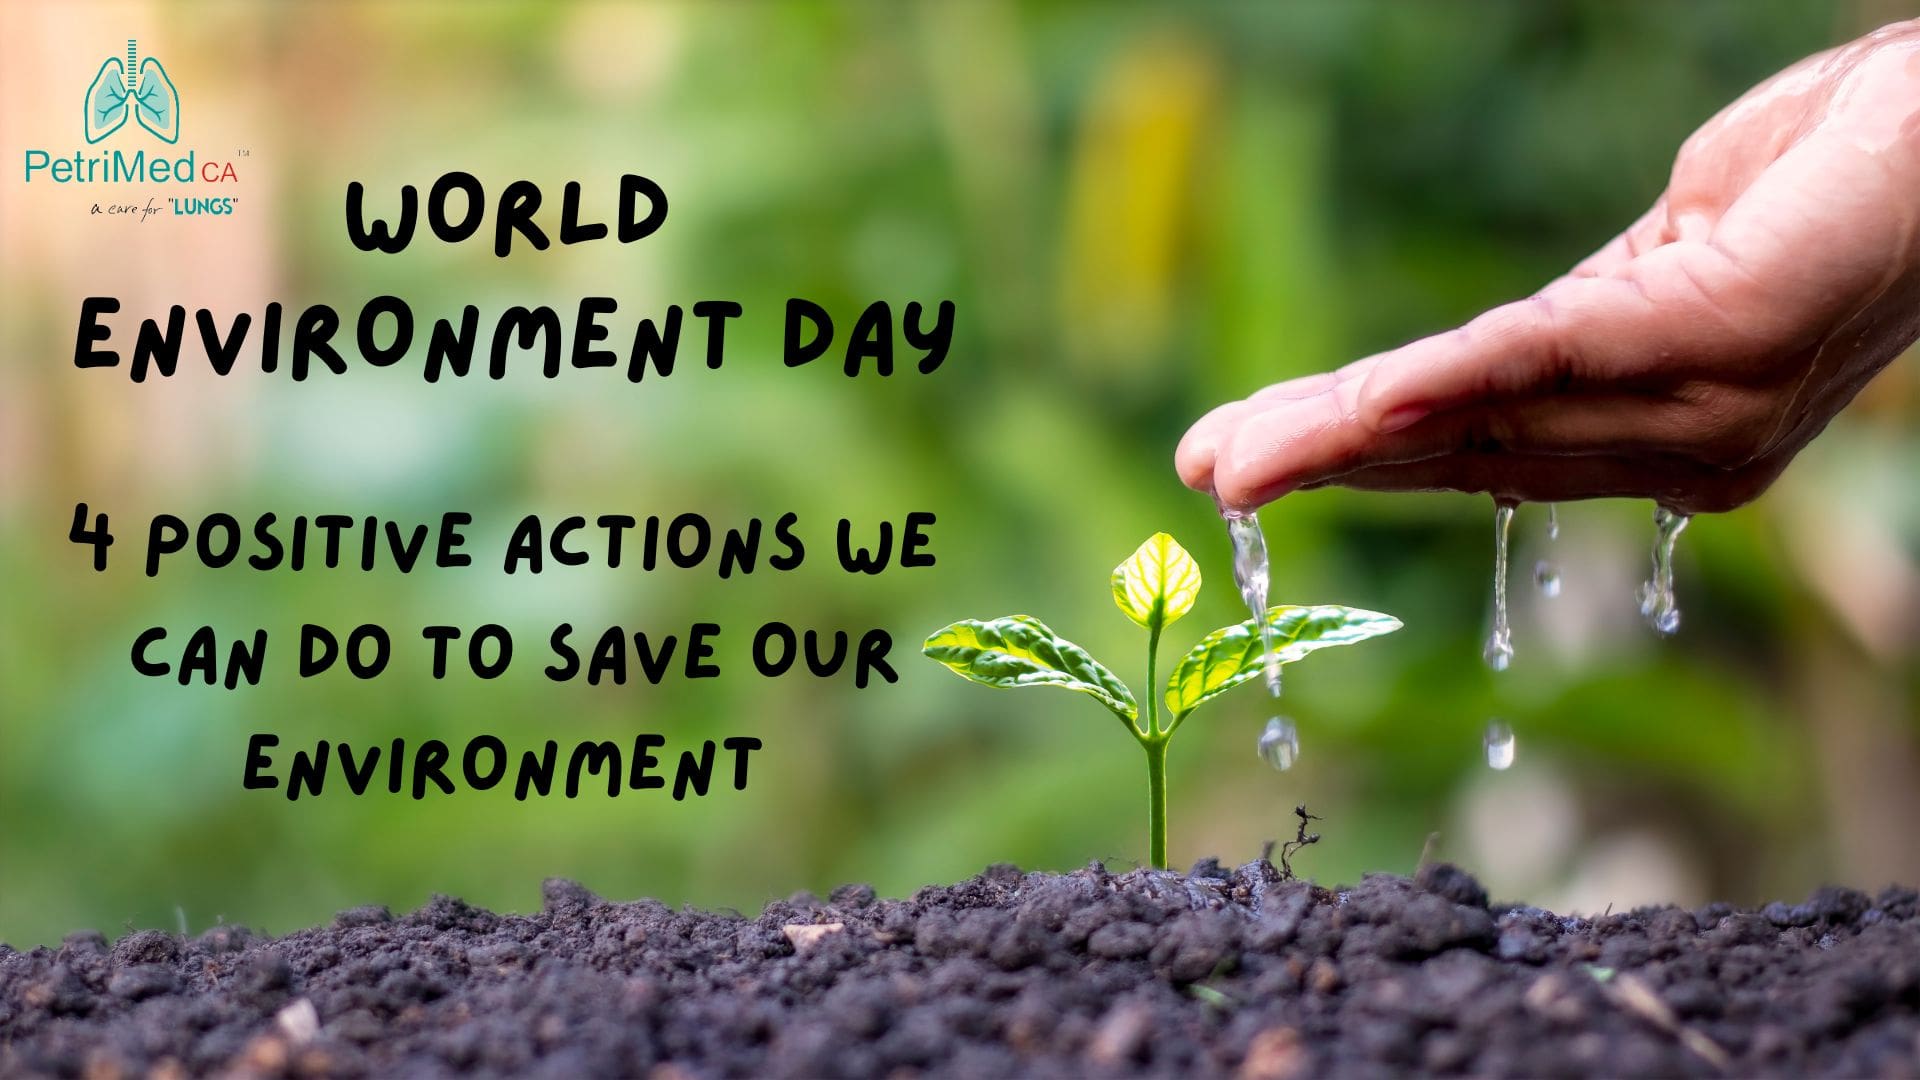 World Environment Day: 4 Positive Actions We Can Do to Save Our Environment